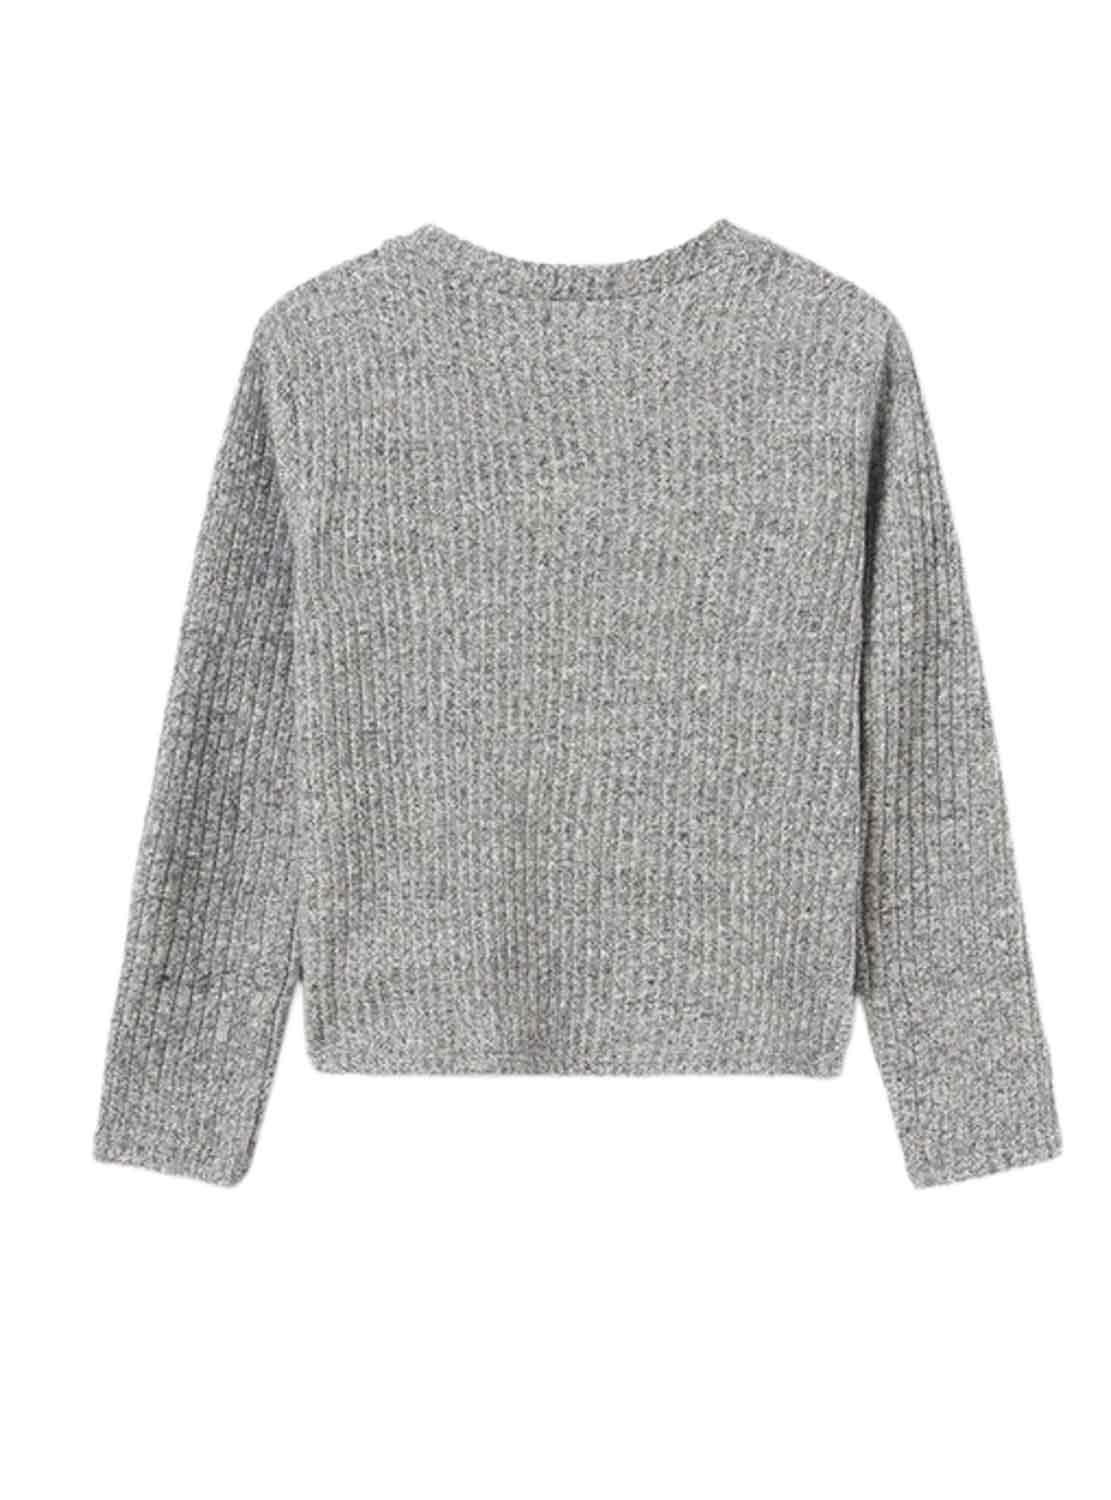 Pullover Mayoral Canale Cut Out Grigio per Bambina